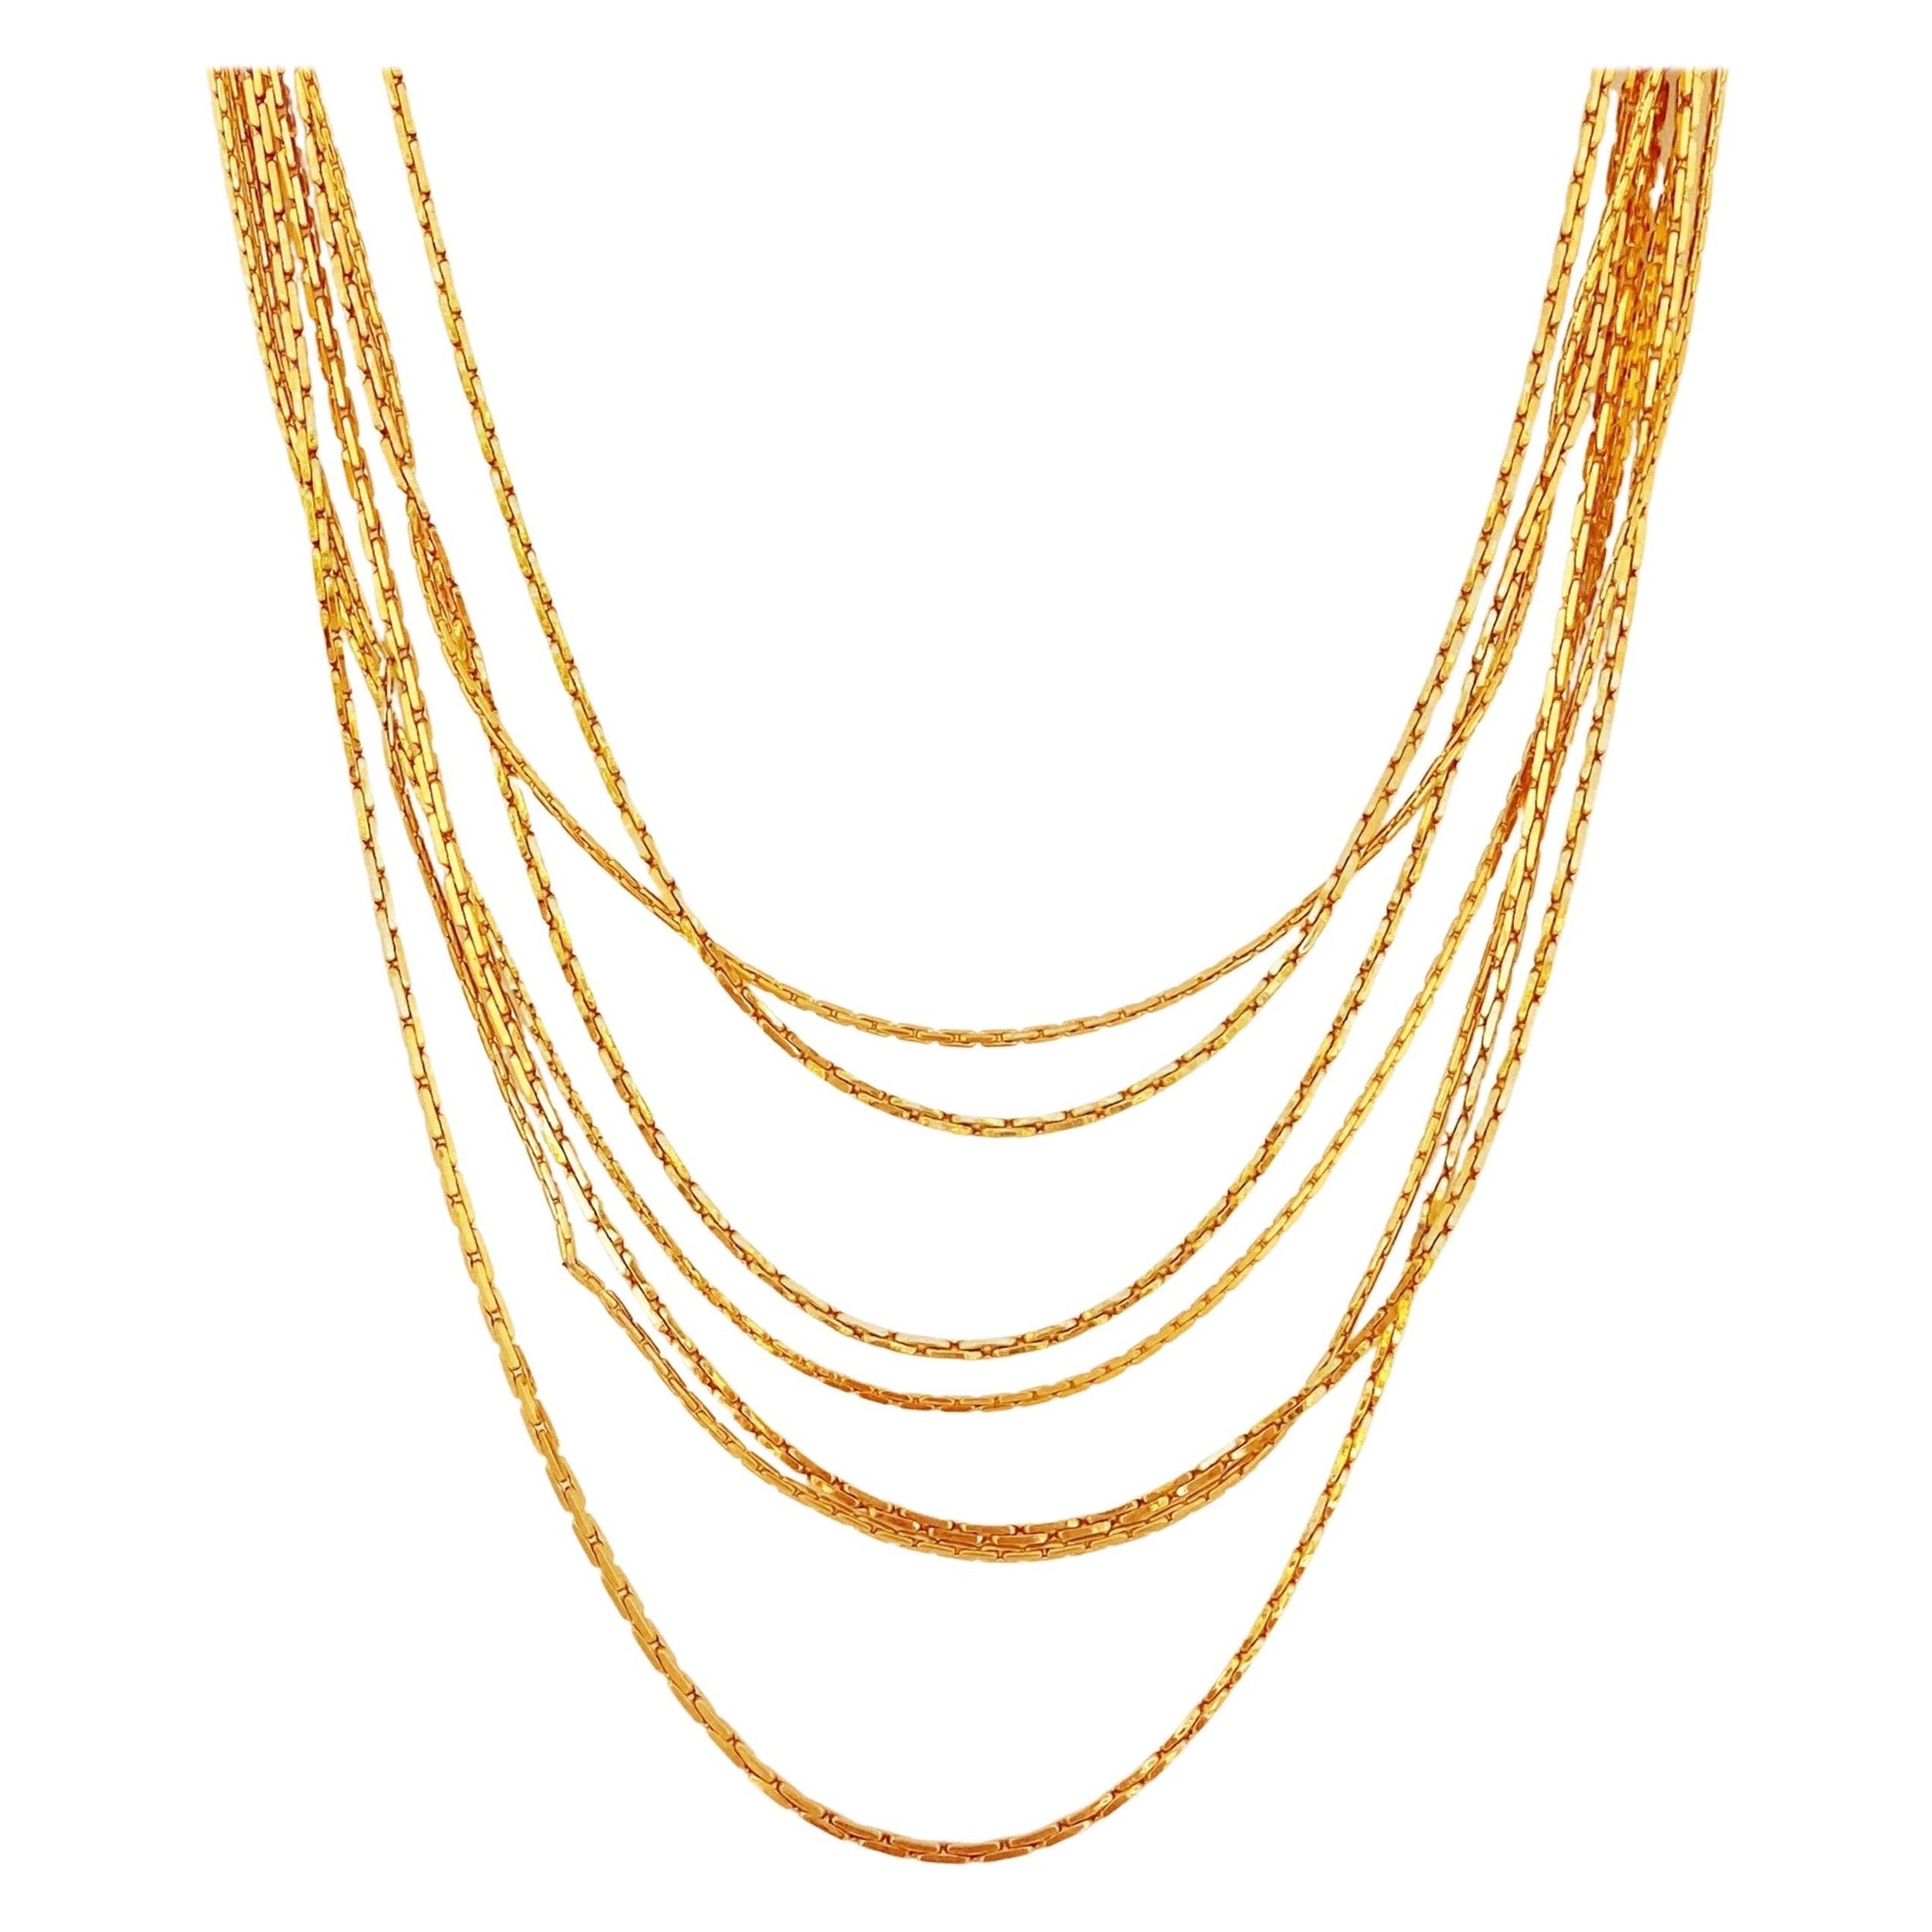 Gold Seven Strand Slinky Chain Necklace By Napier, 1970s